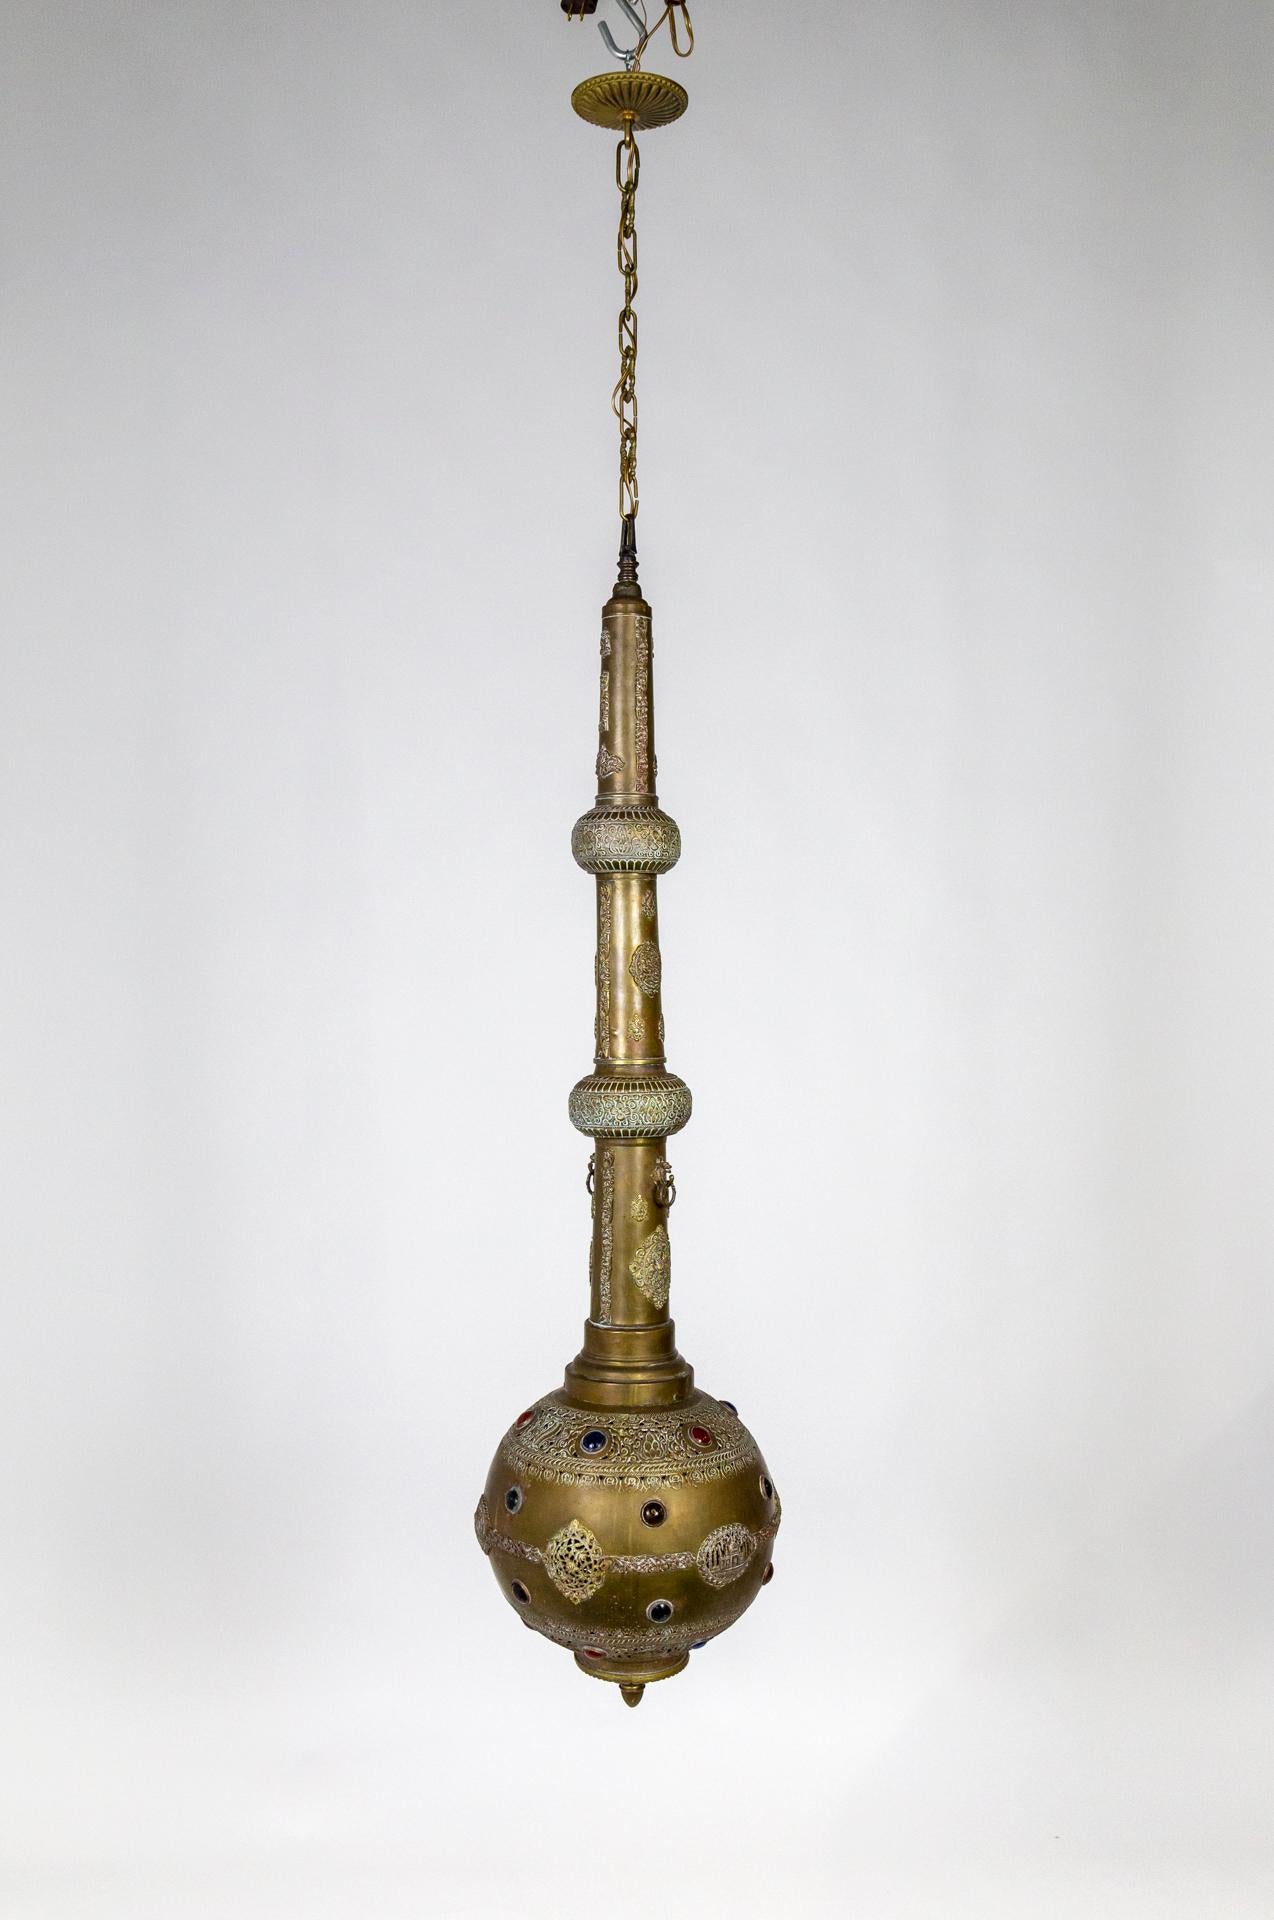 This long, narrow, hanging lamp is in the form of a narrow cylinder ending with a large ball. It mimics an Indian rose water sprinkler or Gulab Pash. Handmade of brass, with intricate, punched-out shapes and depiction of the Taj Mahal, by which